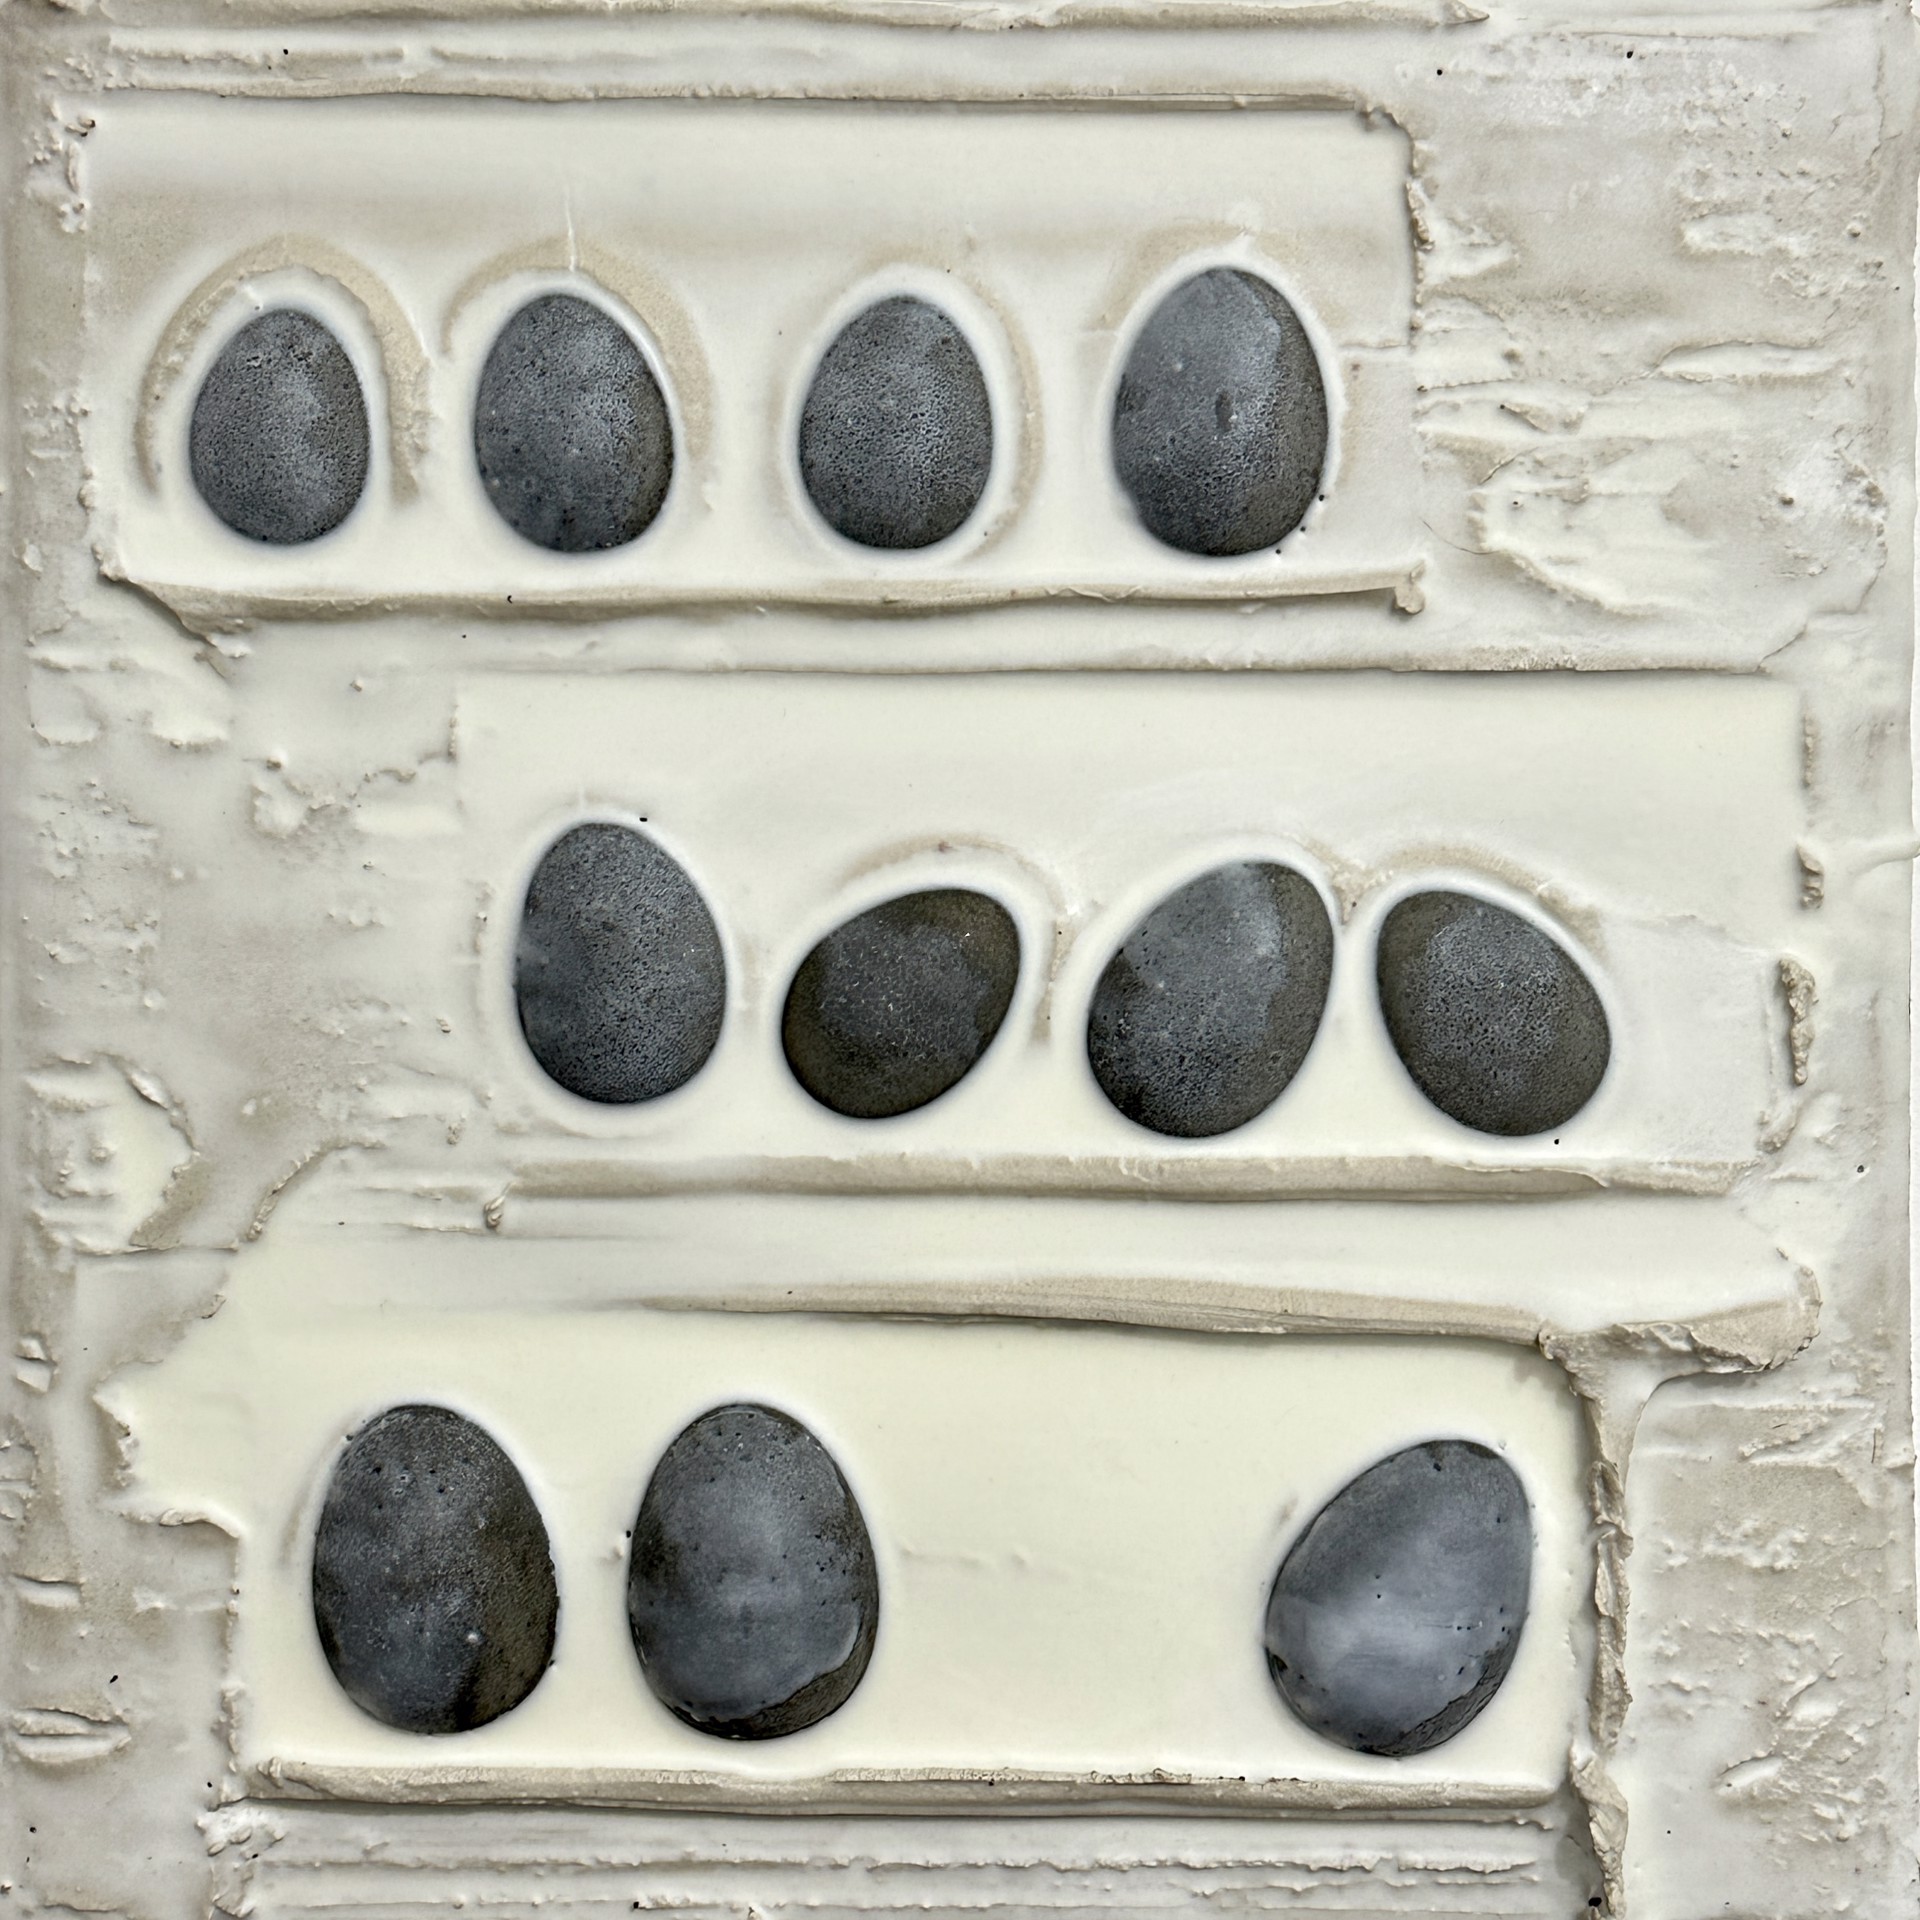 The Stages of Egg Matting by Scott Connelly